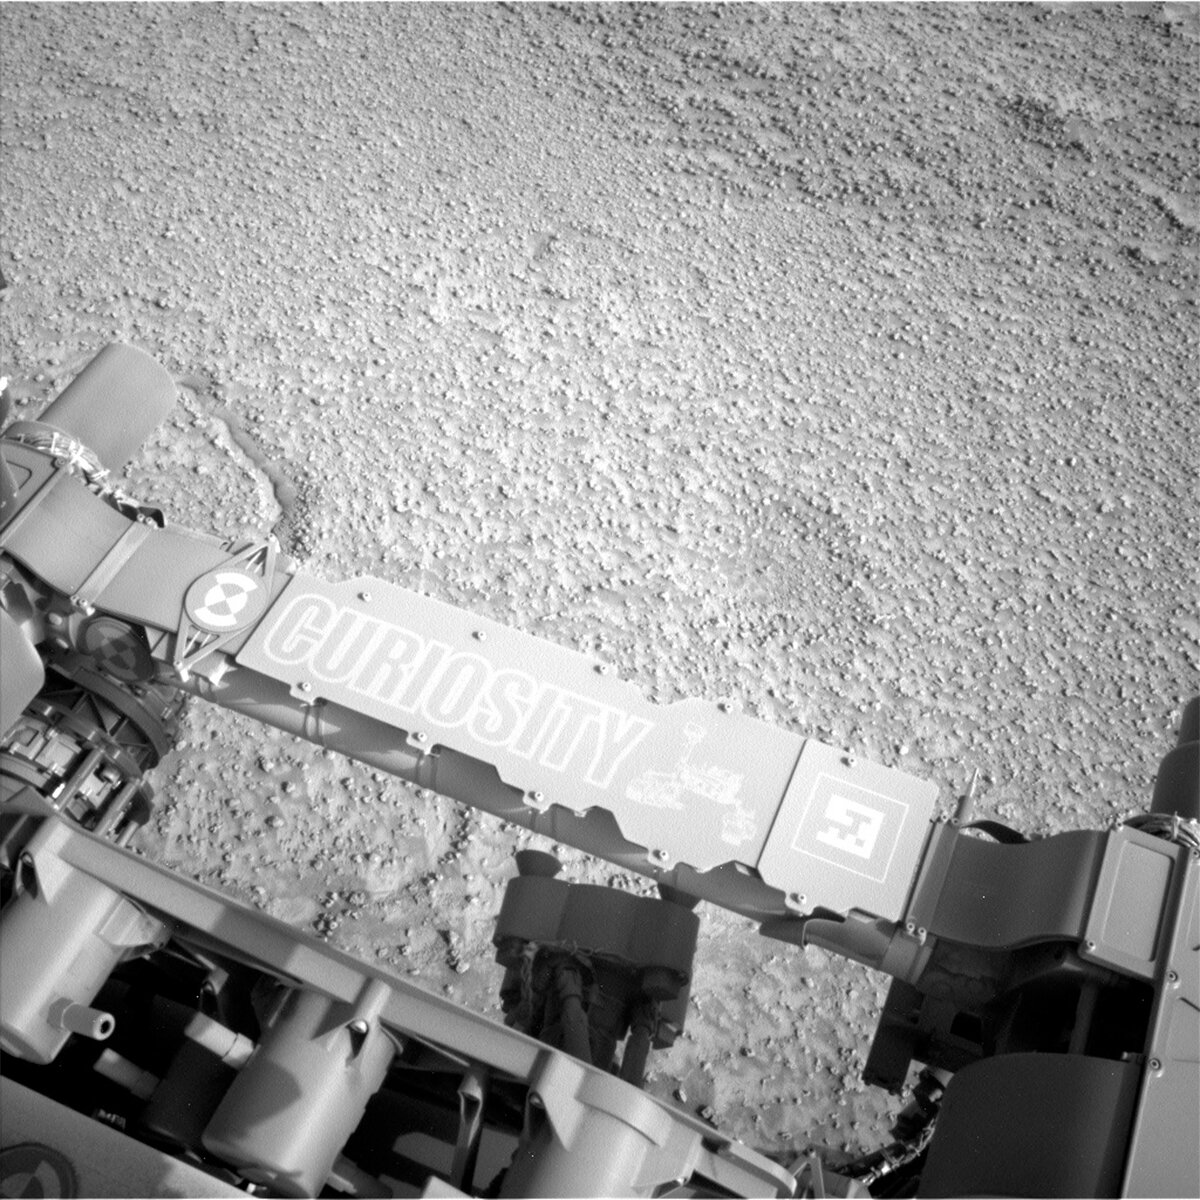 This image showing Curiosity's nameplate and the Mars surface was taken by Left Navigation Camera onboard the Curiosity rover on Sol 3728. 